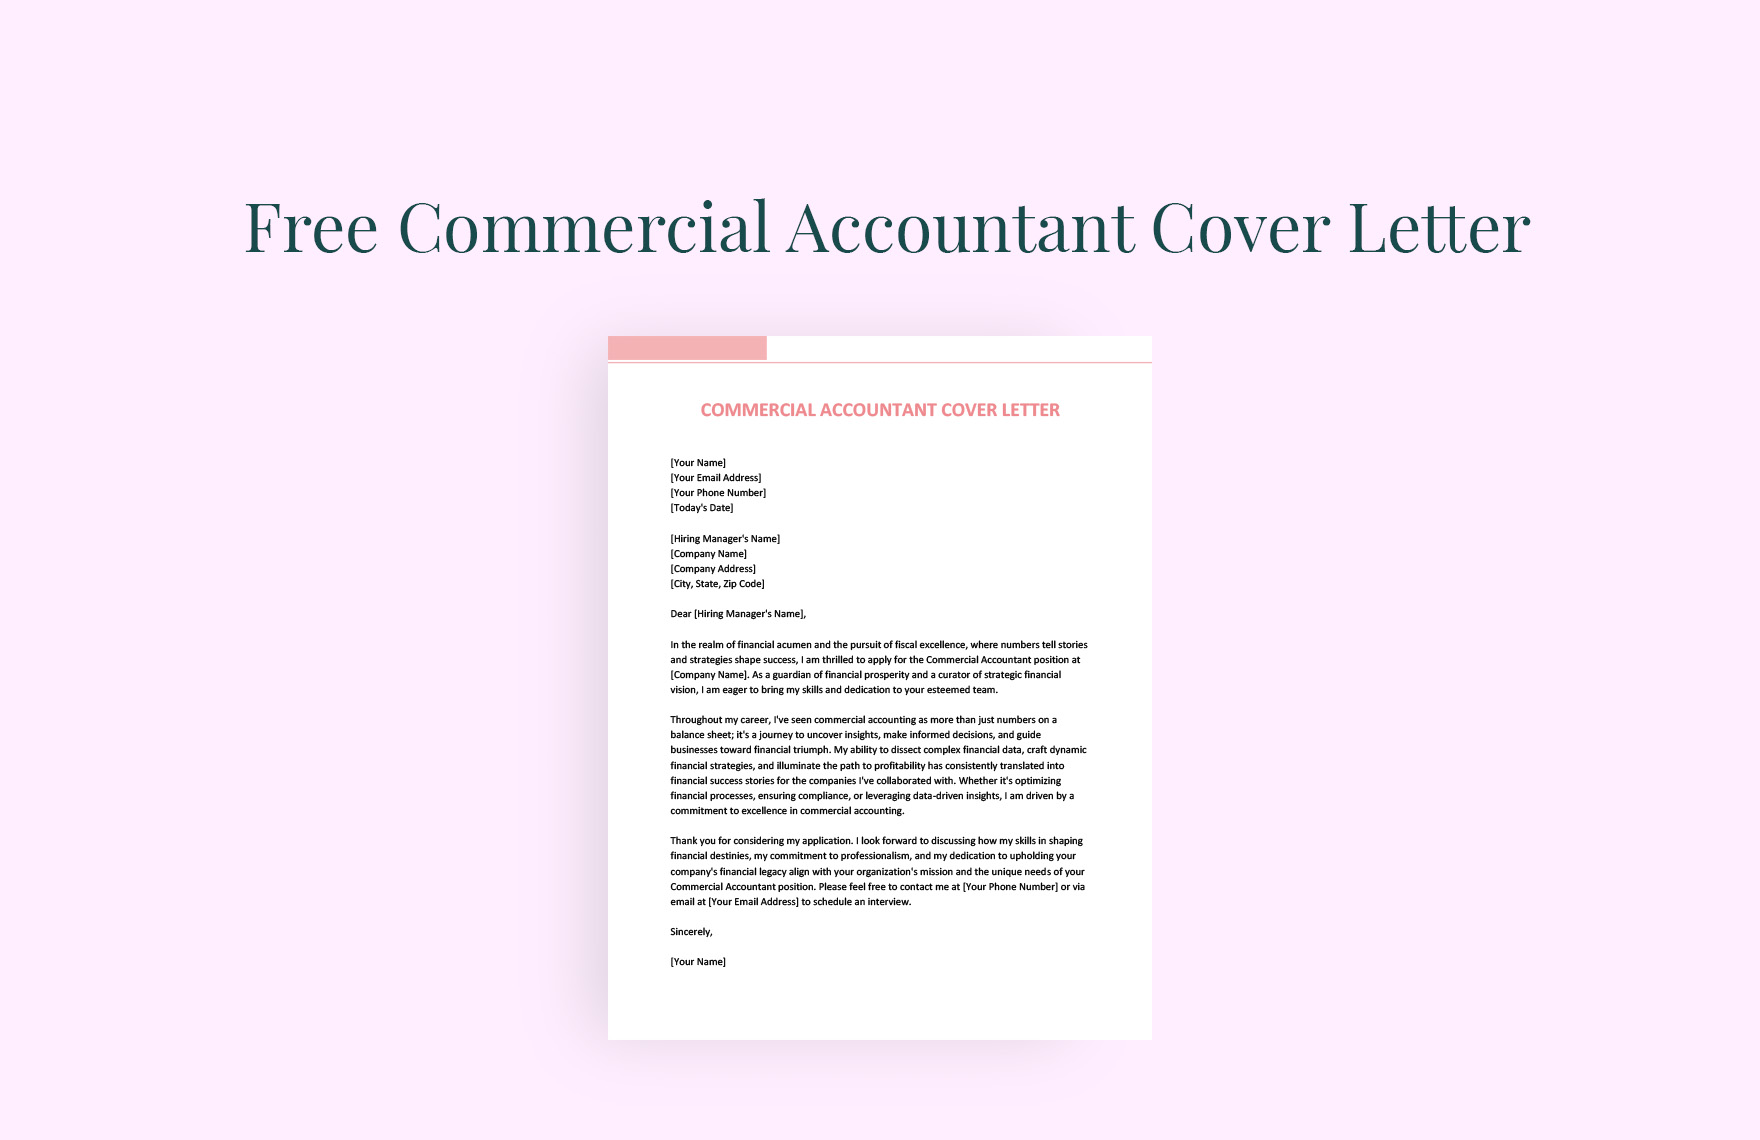 Commercial Accountant Cover Letter in Word, Google Docs